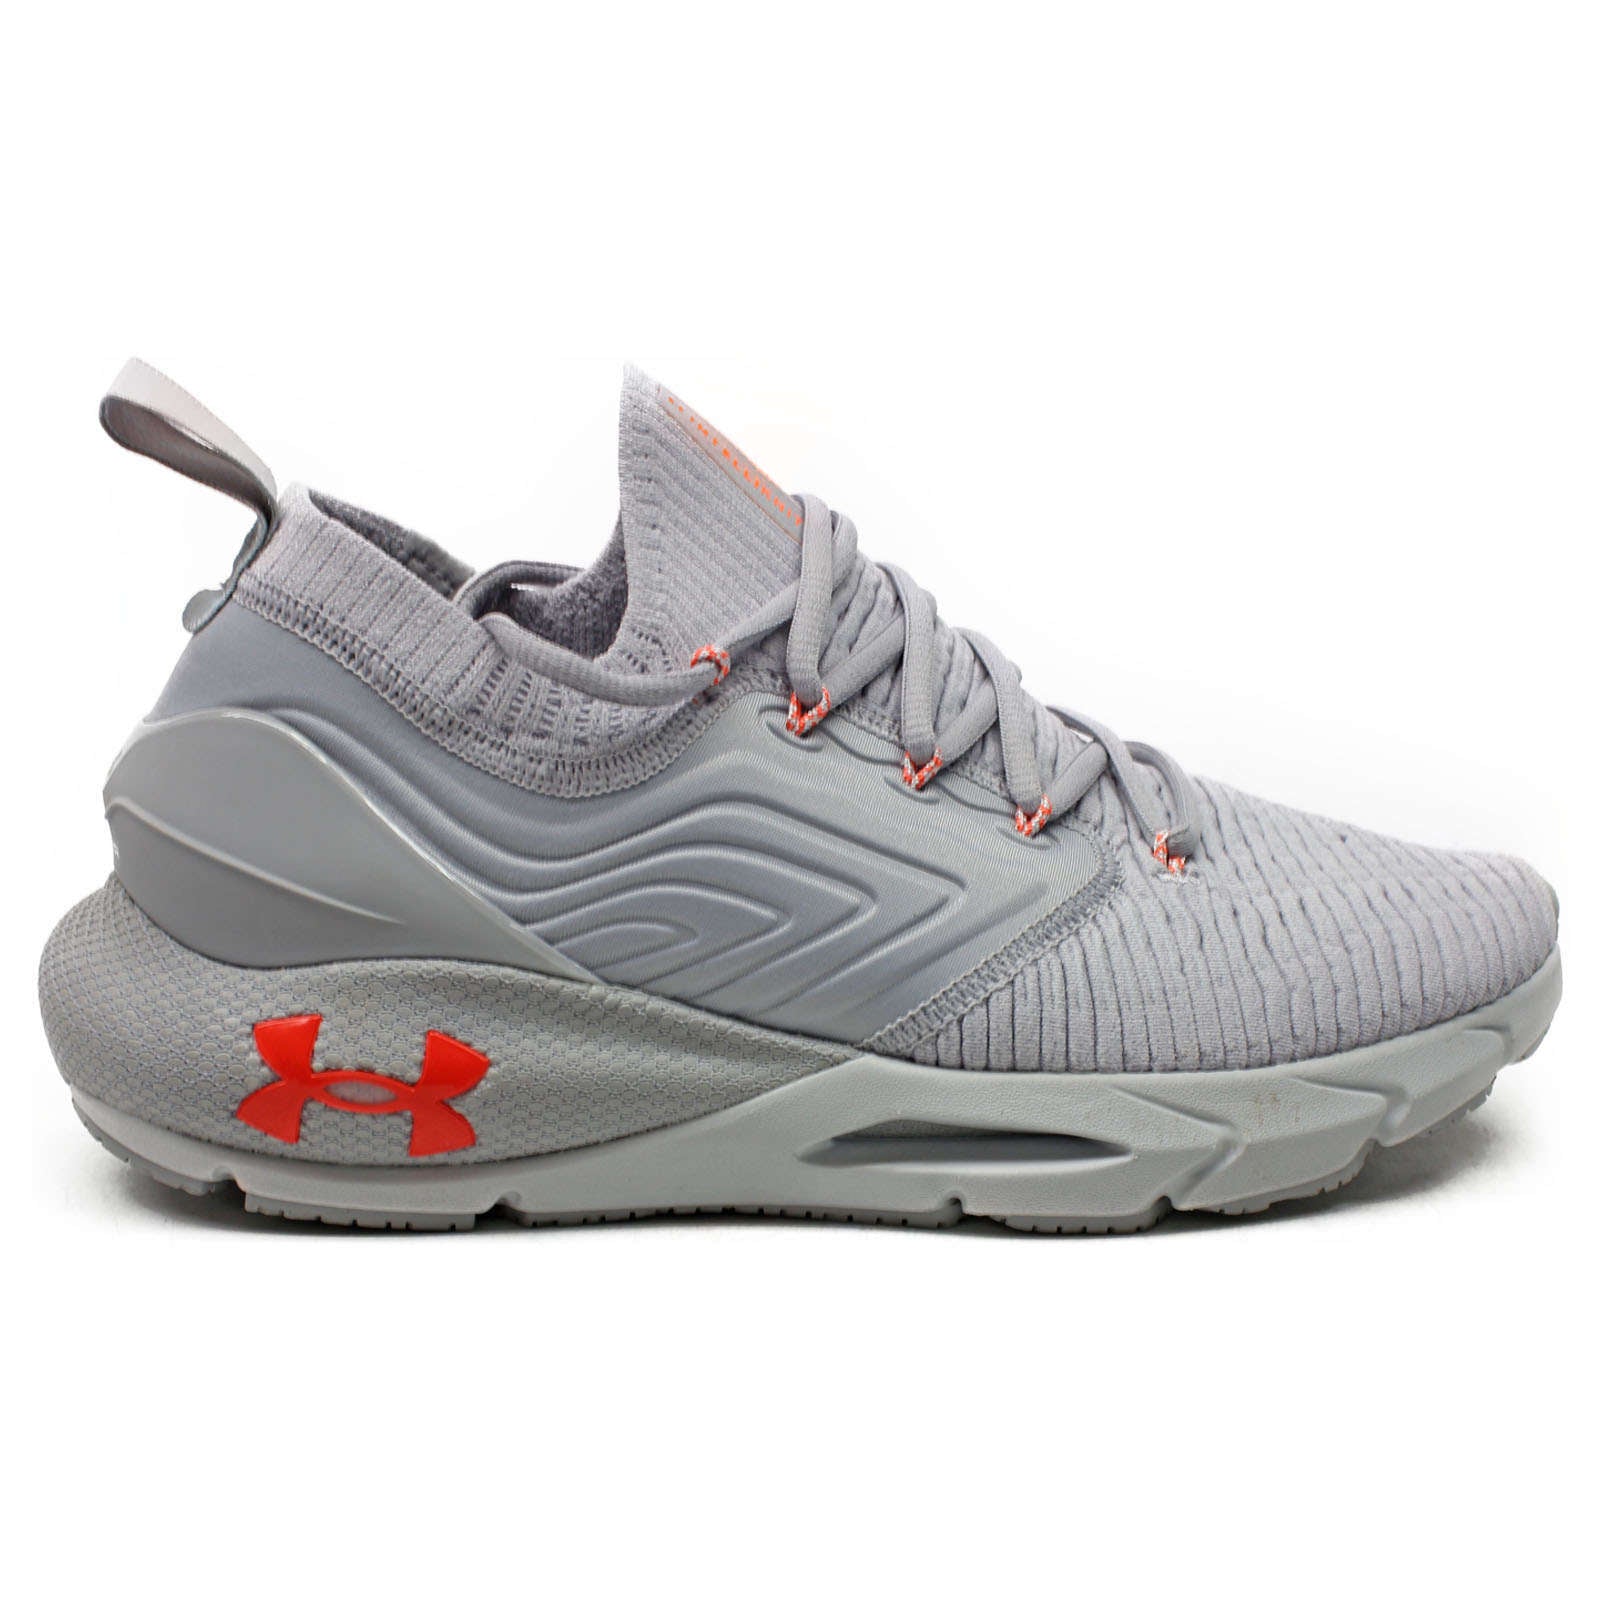 Under Armour HOVR Phantom 2 INKNT Synthetic Textile Men's Low-Top Trainers#color_grey grey